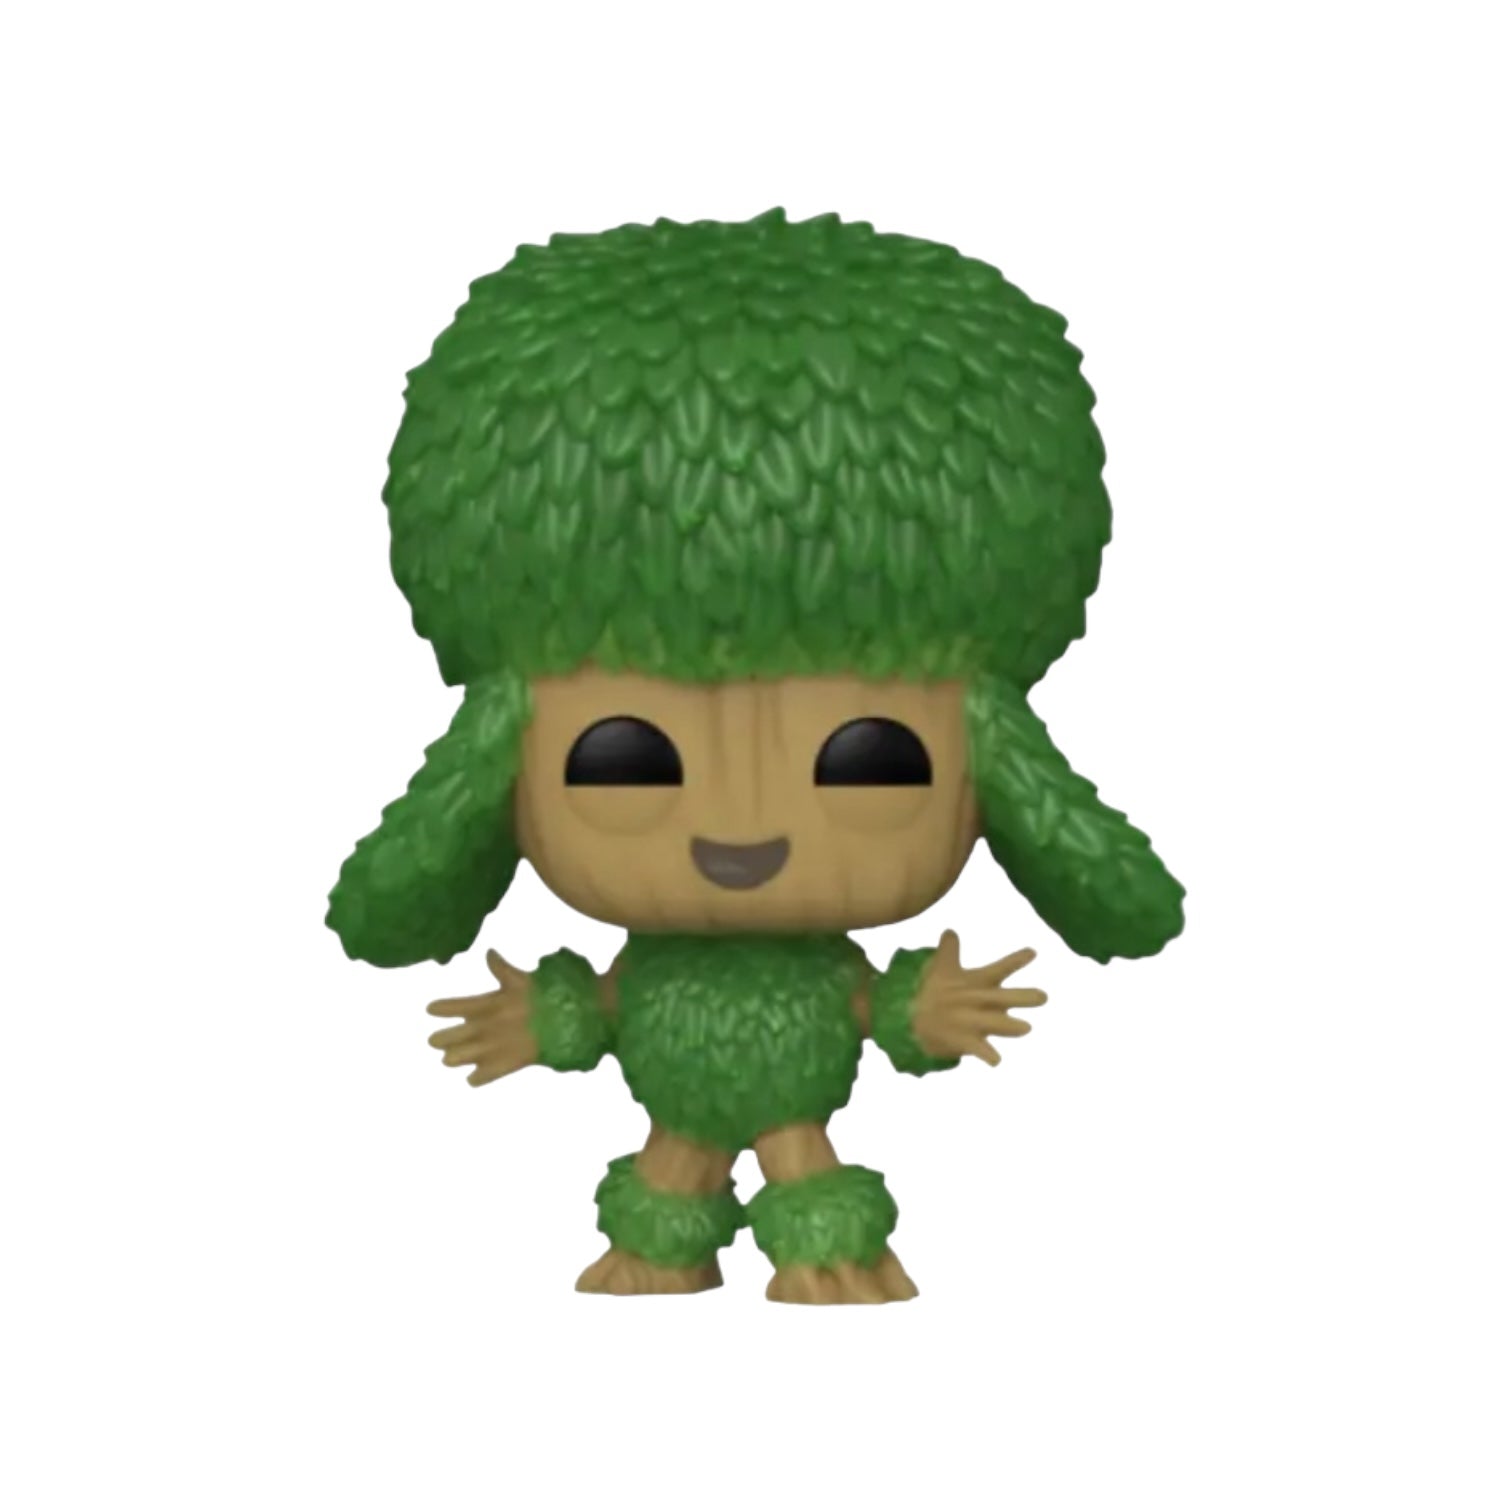 Poodle Groot #1219 Funko Pop! - I am Groot - Funko Special Edition